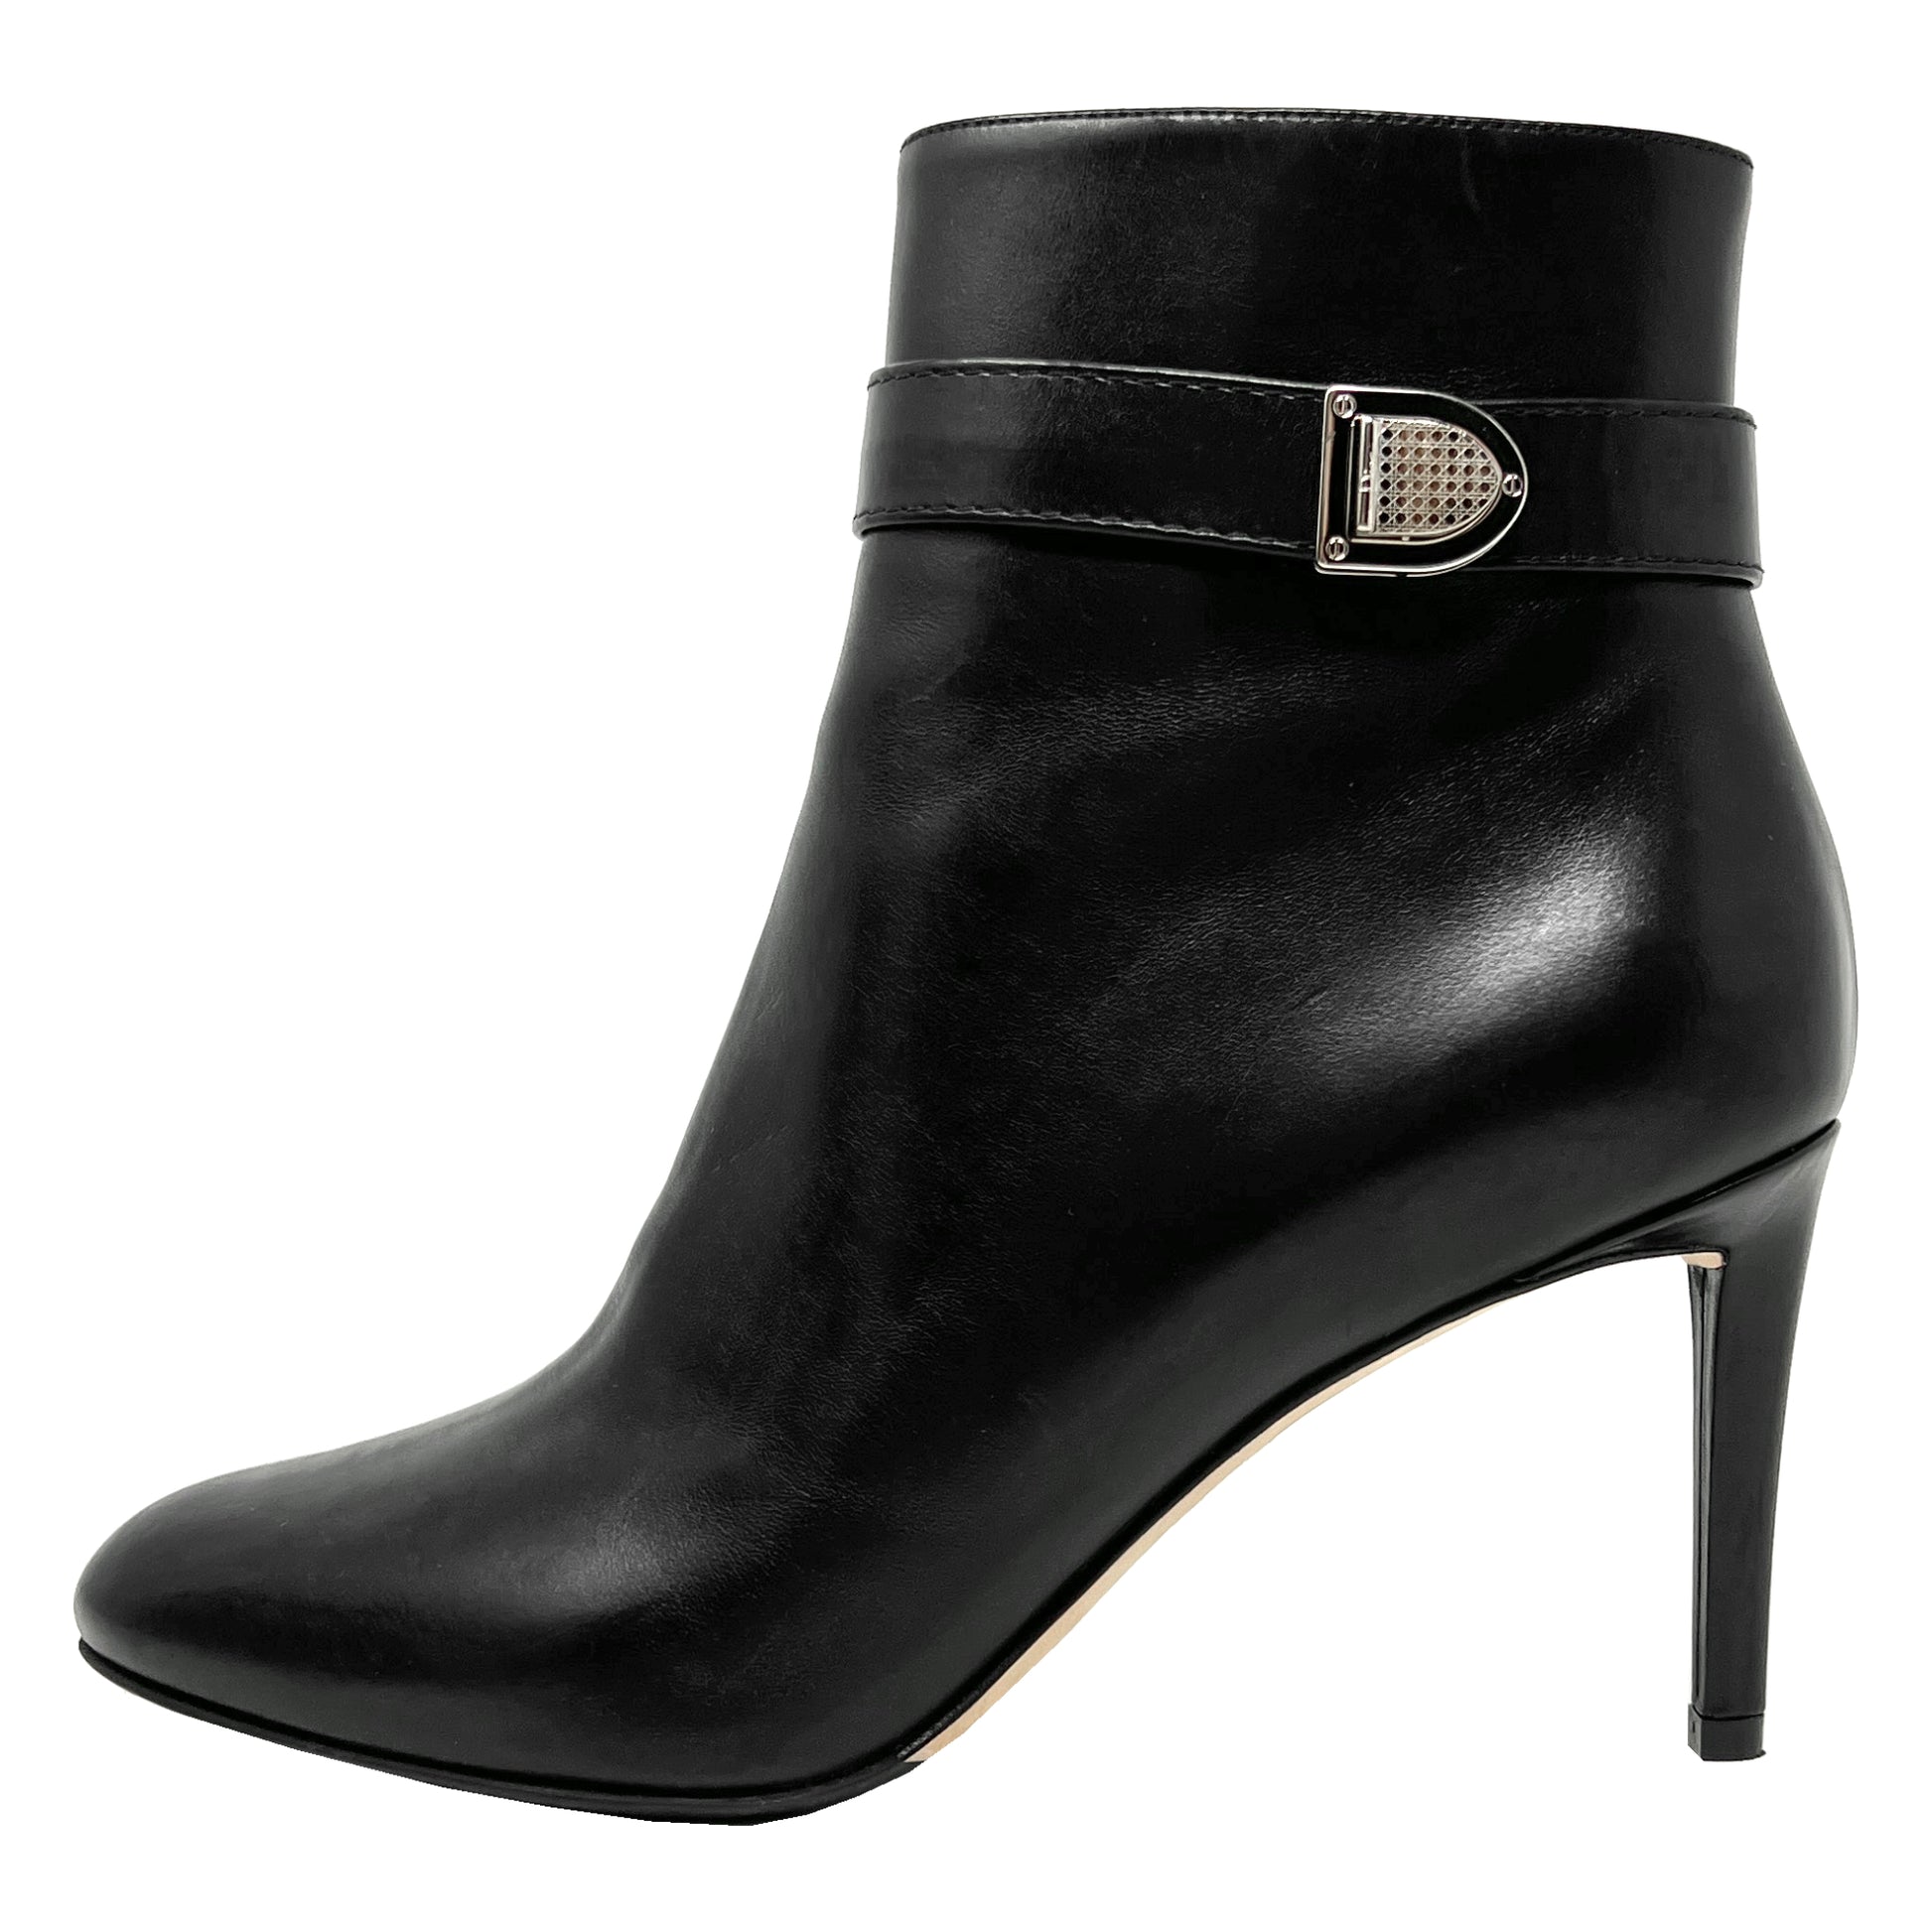 Christian Dior Black Leather Almond Round Toe Silver Buckle Heels Ankle Boots